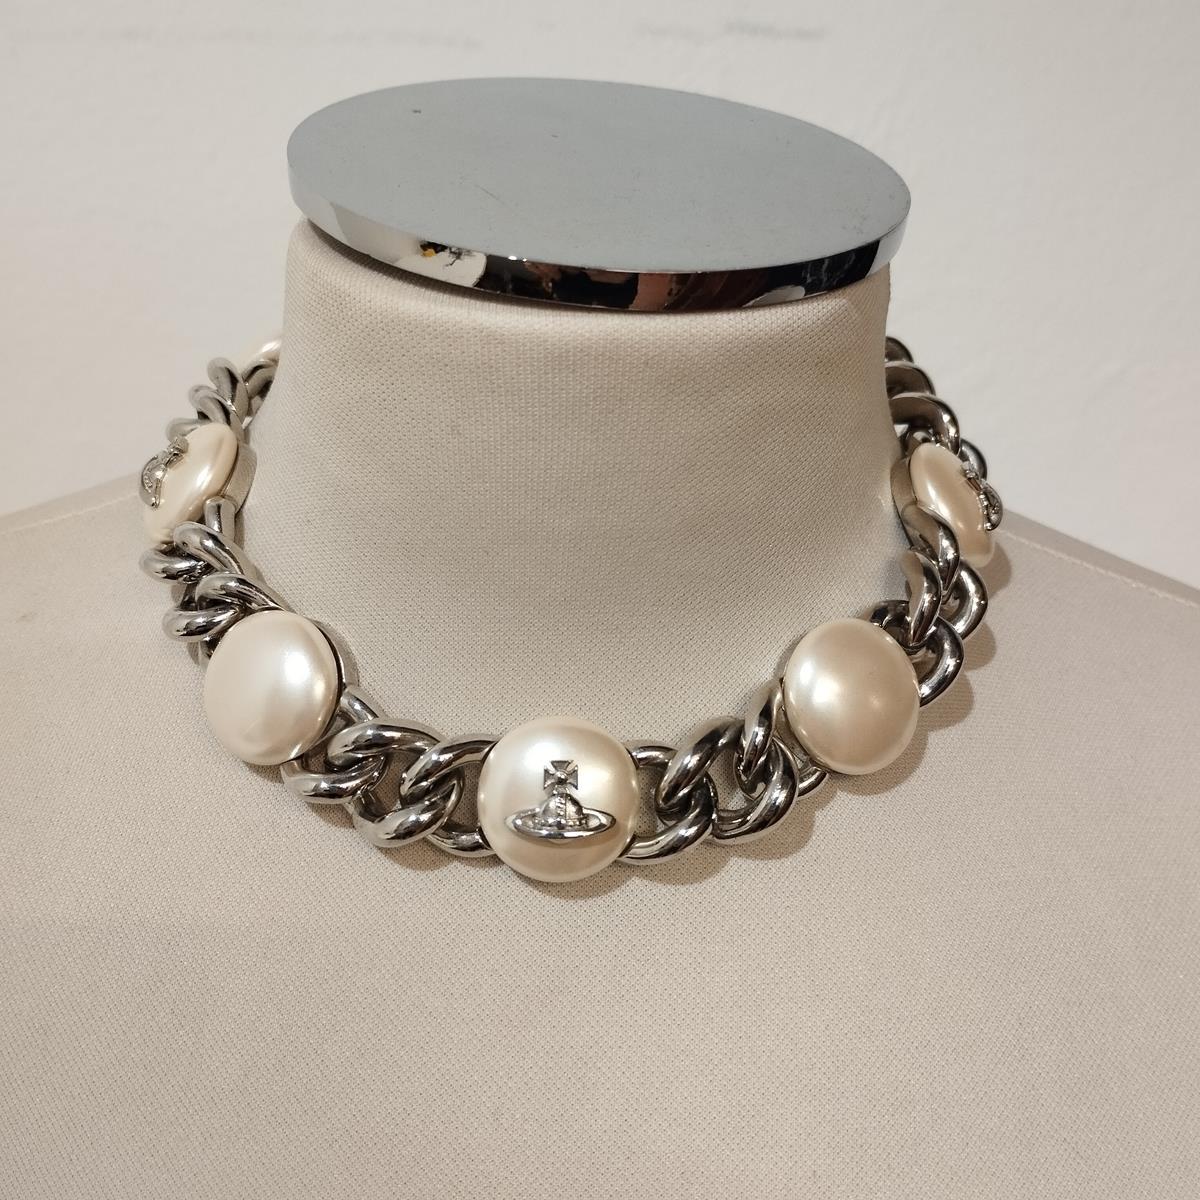 Very chic and iconic Vivienne Westwood collier
Metal chain
Pearl like element
VW Logo
Total lenght cm 40 (15,6 inches)
With pouch
Worldwide express shipping included in the price 